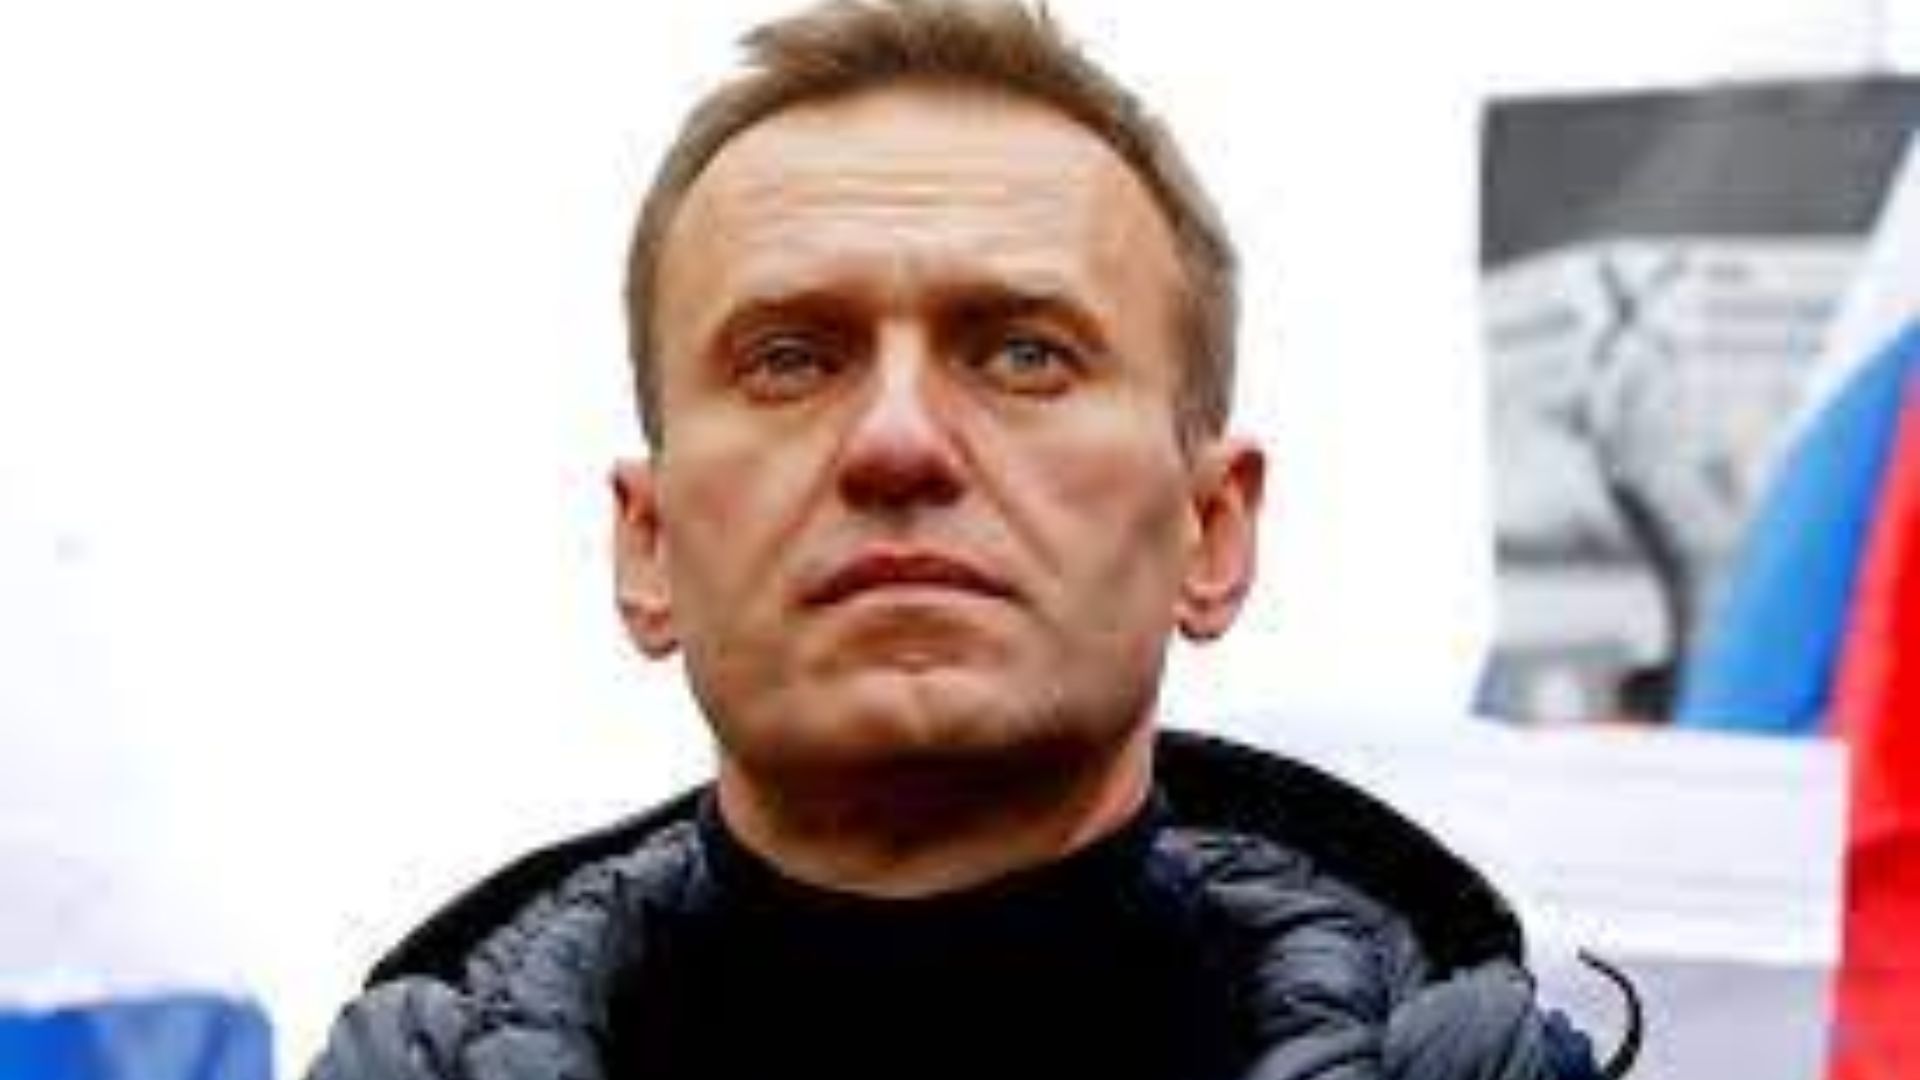 Russian opposition leader Alexei Navalny passed away on Friday at the Arctic prison colony